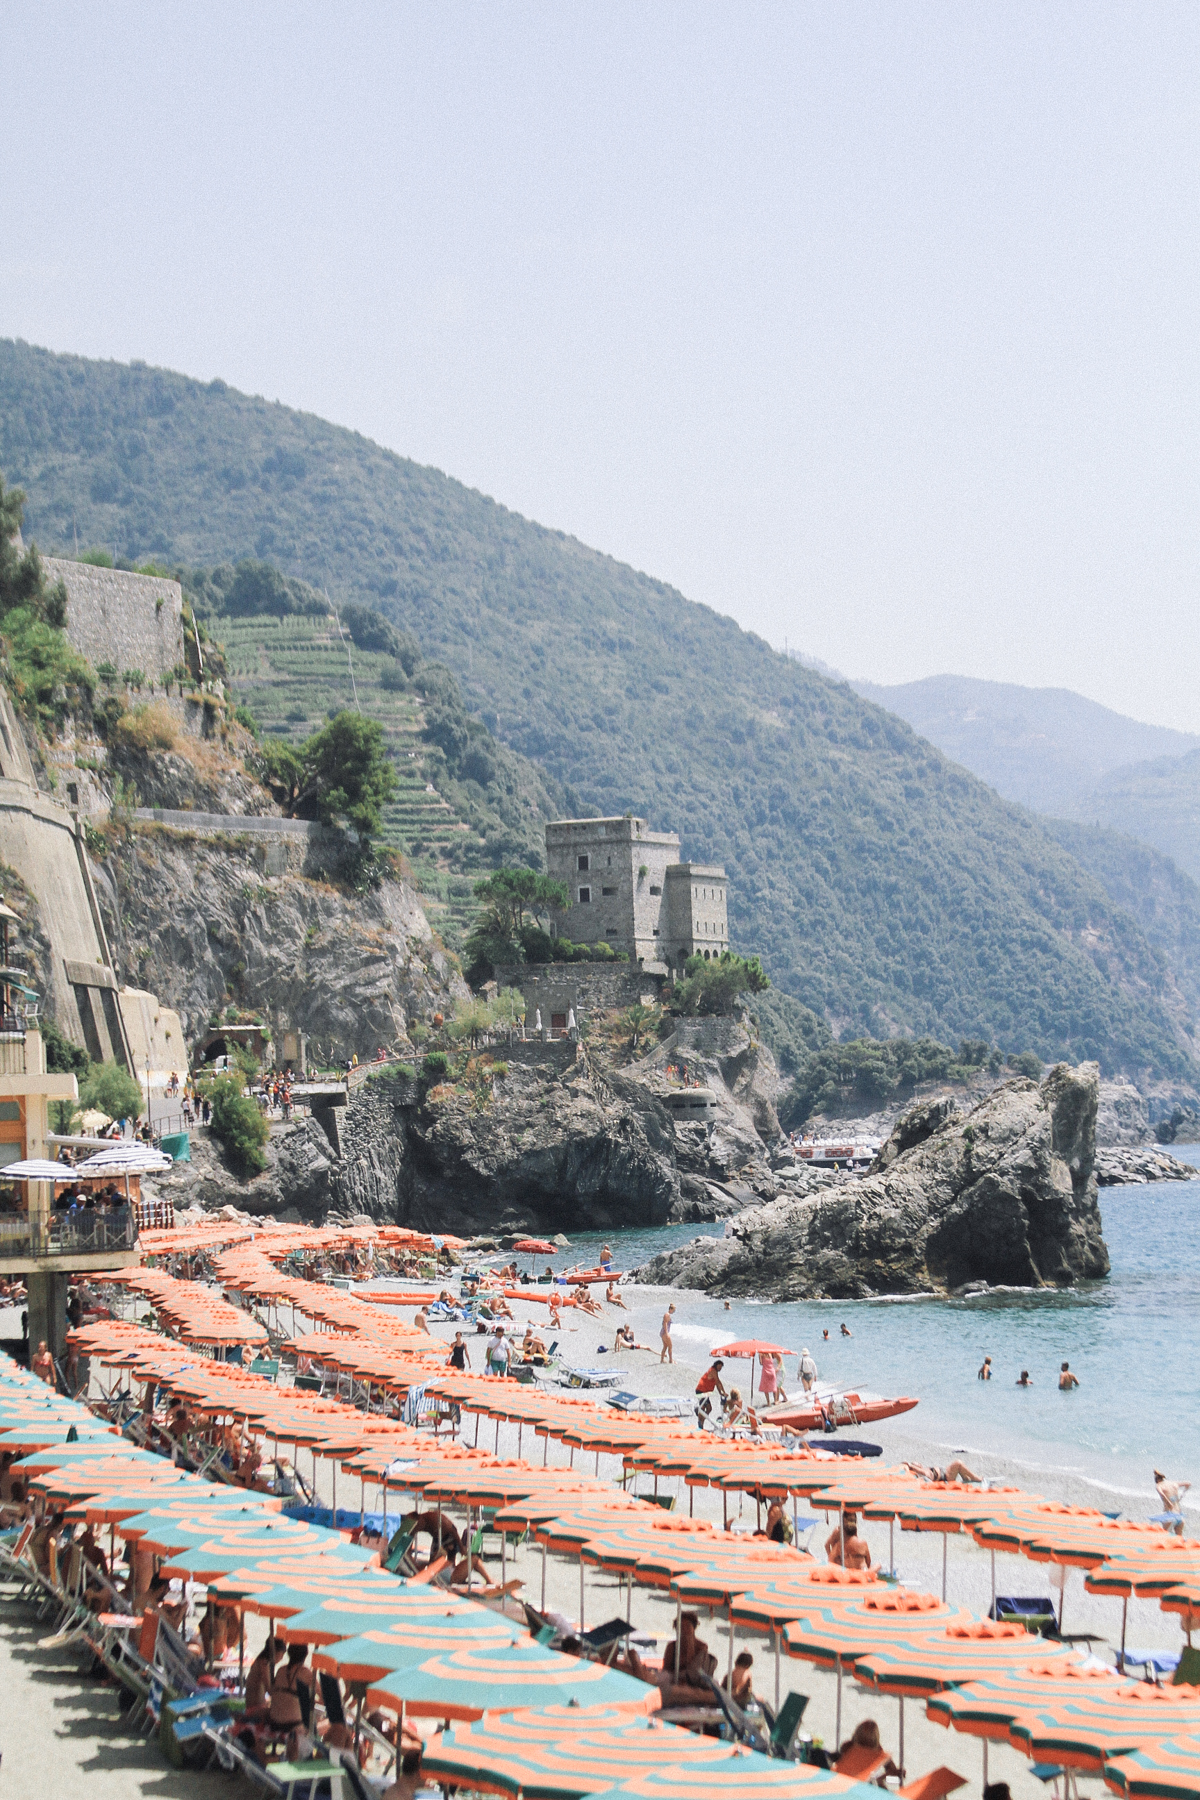 How (Not) to See Cinque Terre, Italy in One Day | You just can’t see all five towns on a day trip! But with this guide of the best things to do (from beaches and hiking paths to food and views), you can plan your own perfect Cinque Terre itinerary -…